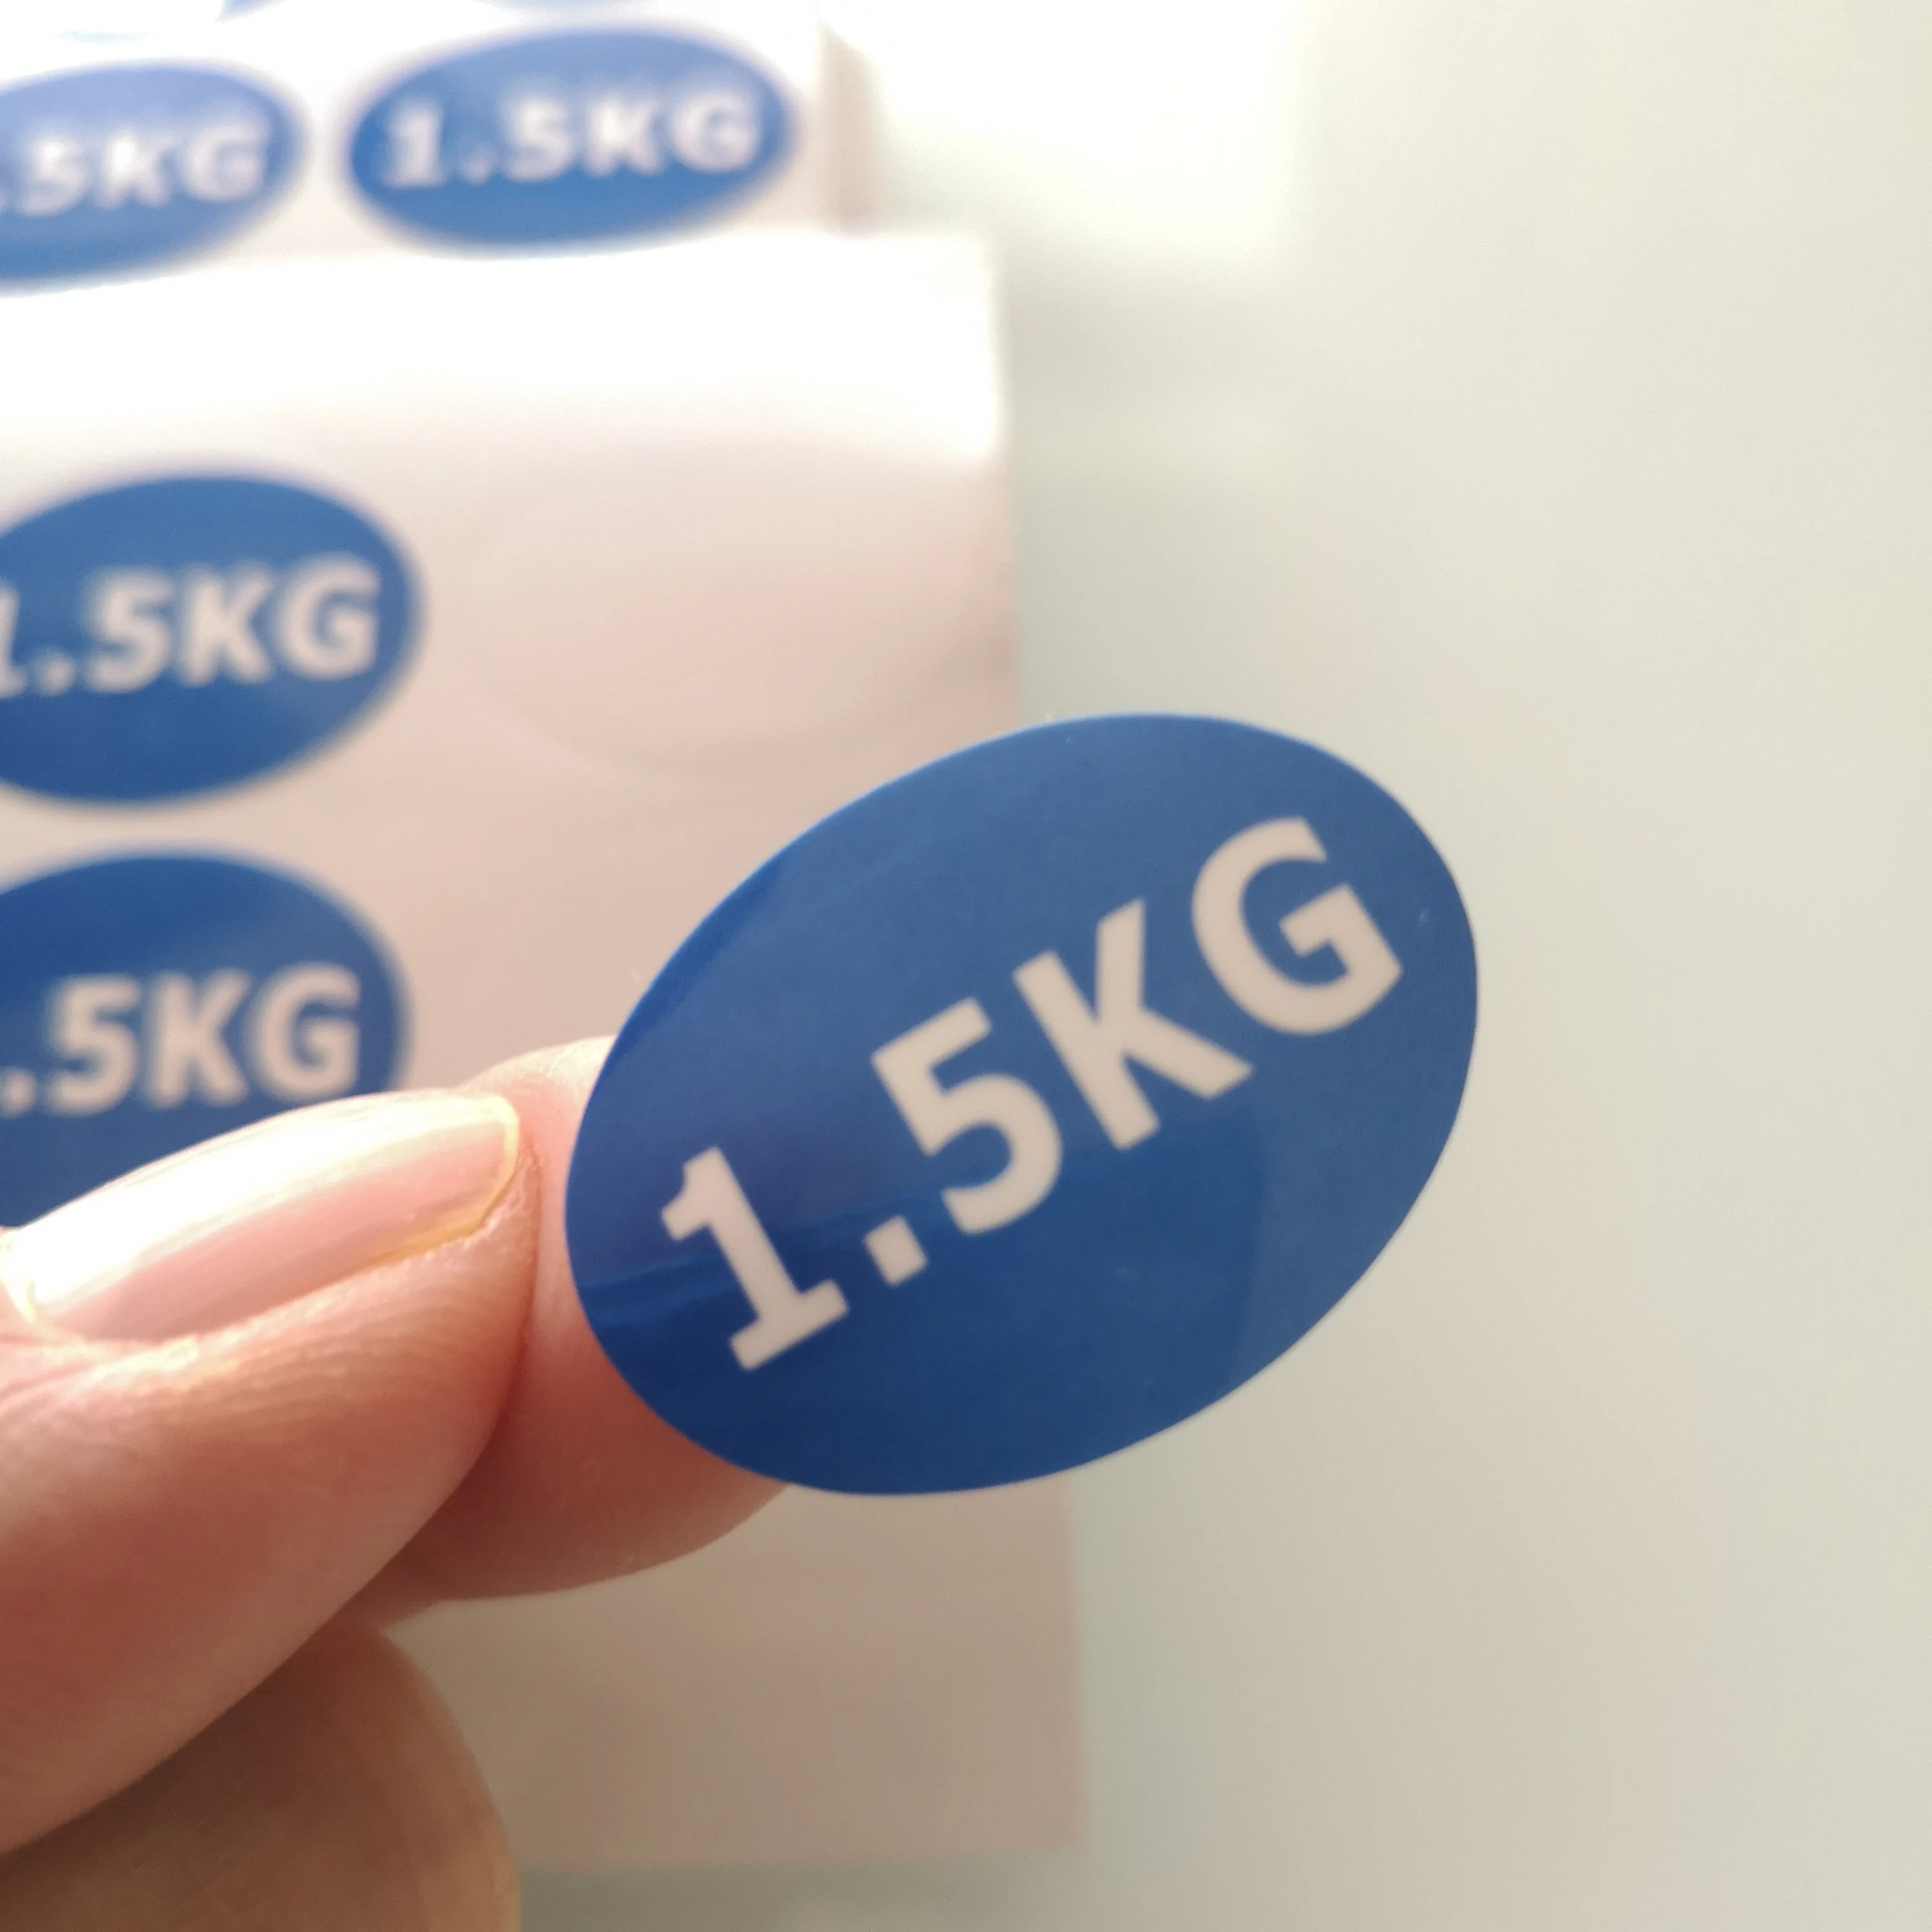 1000pcs 2.7x2cm 1.5KG weight number Self-adhesive paper label sticker for packing, Item No. FA42